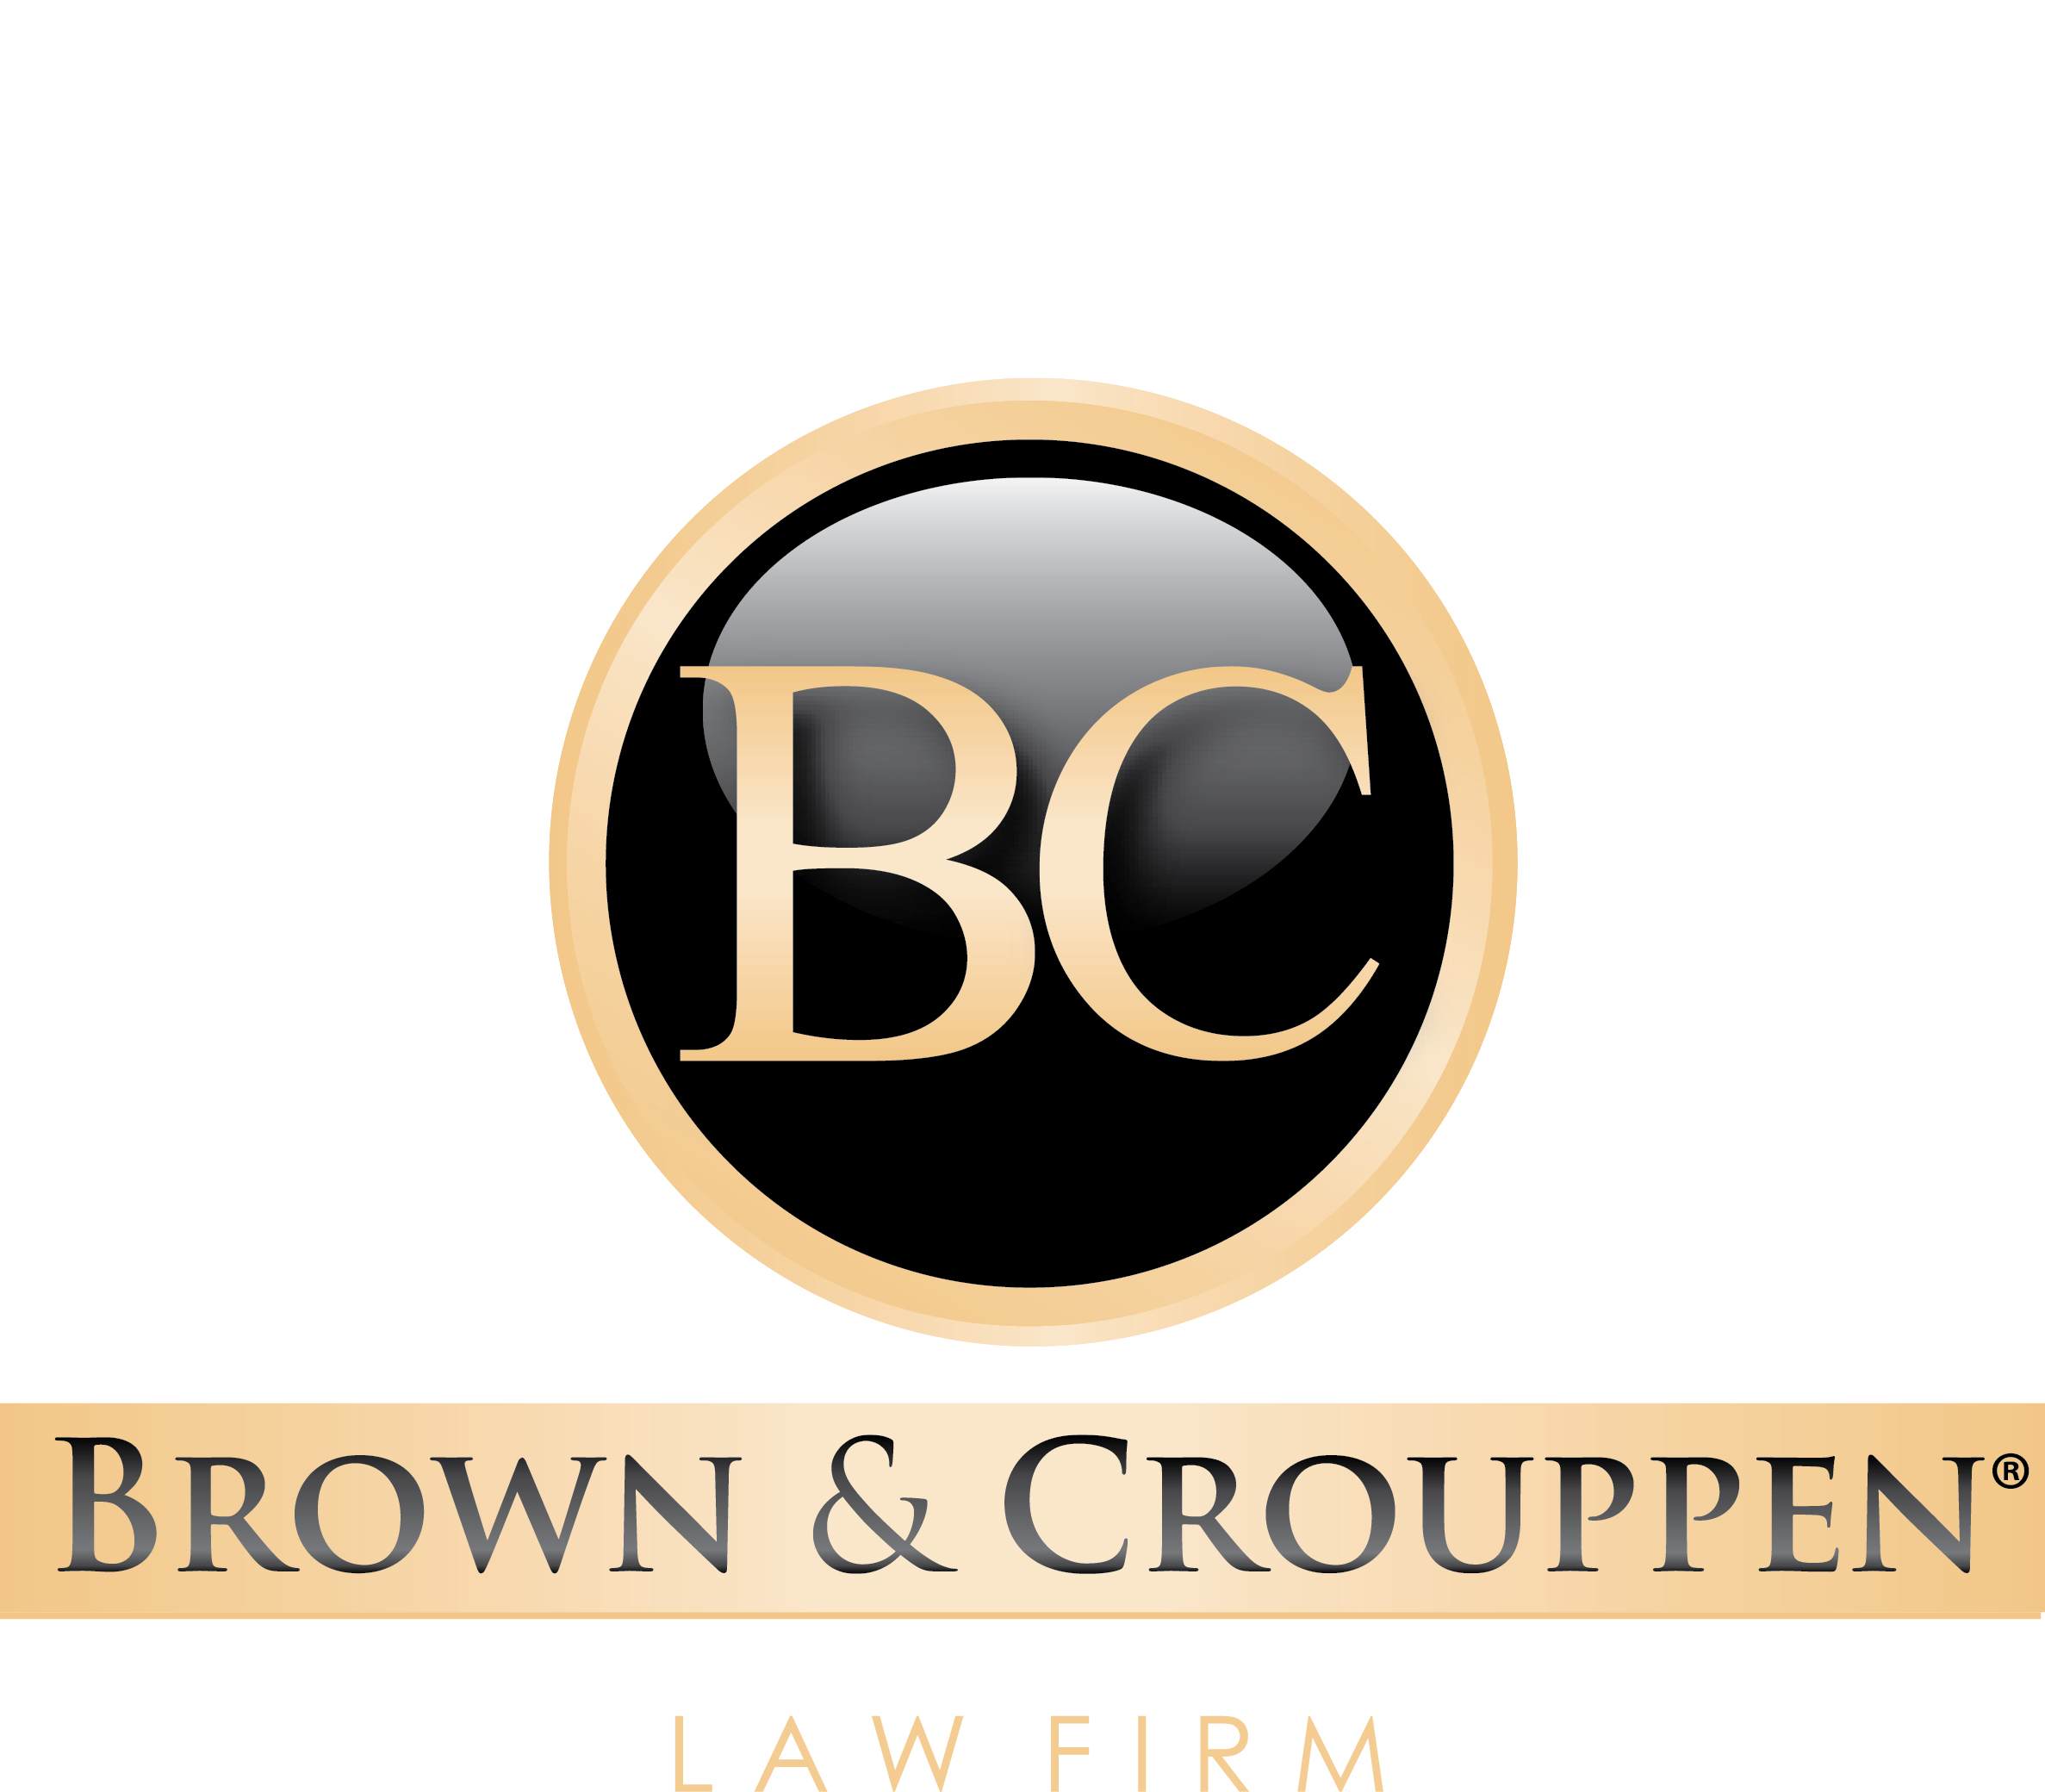 Brown & Crouppen Law Firm logo